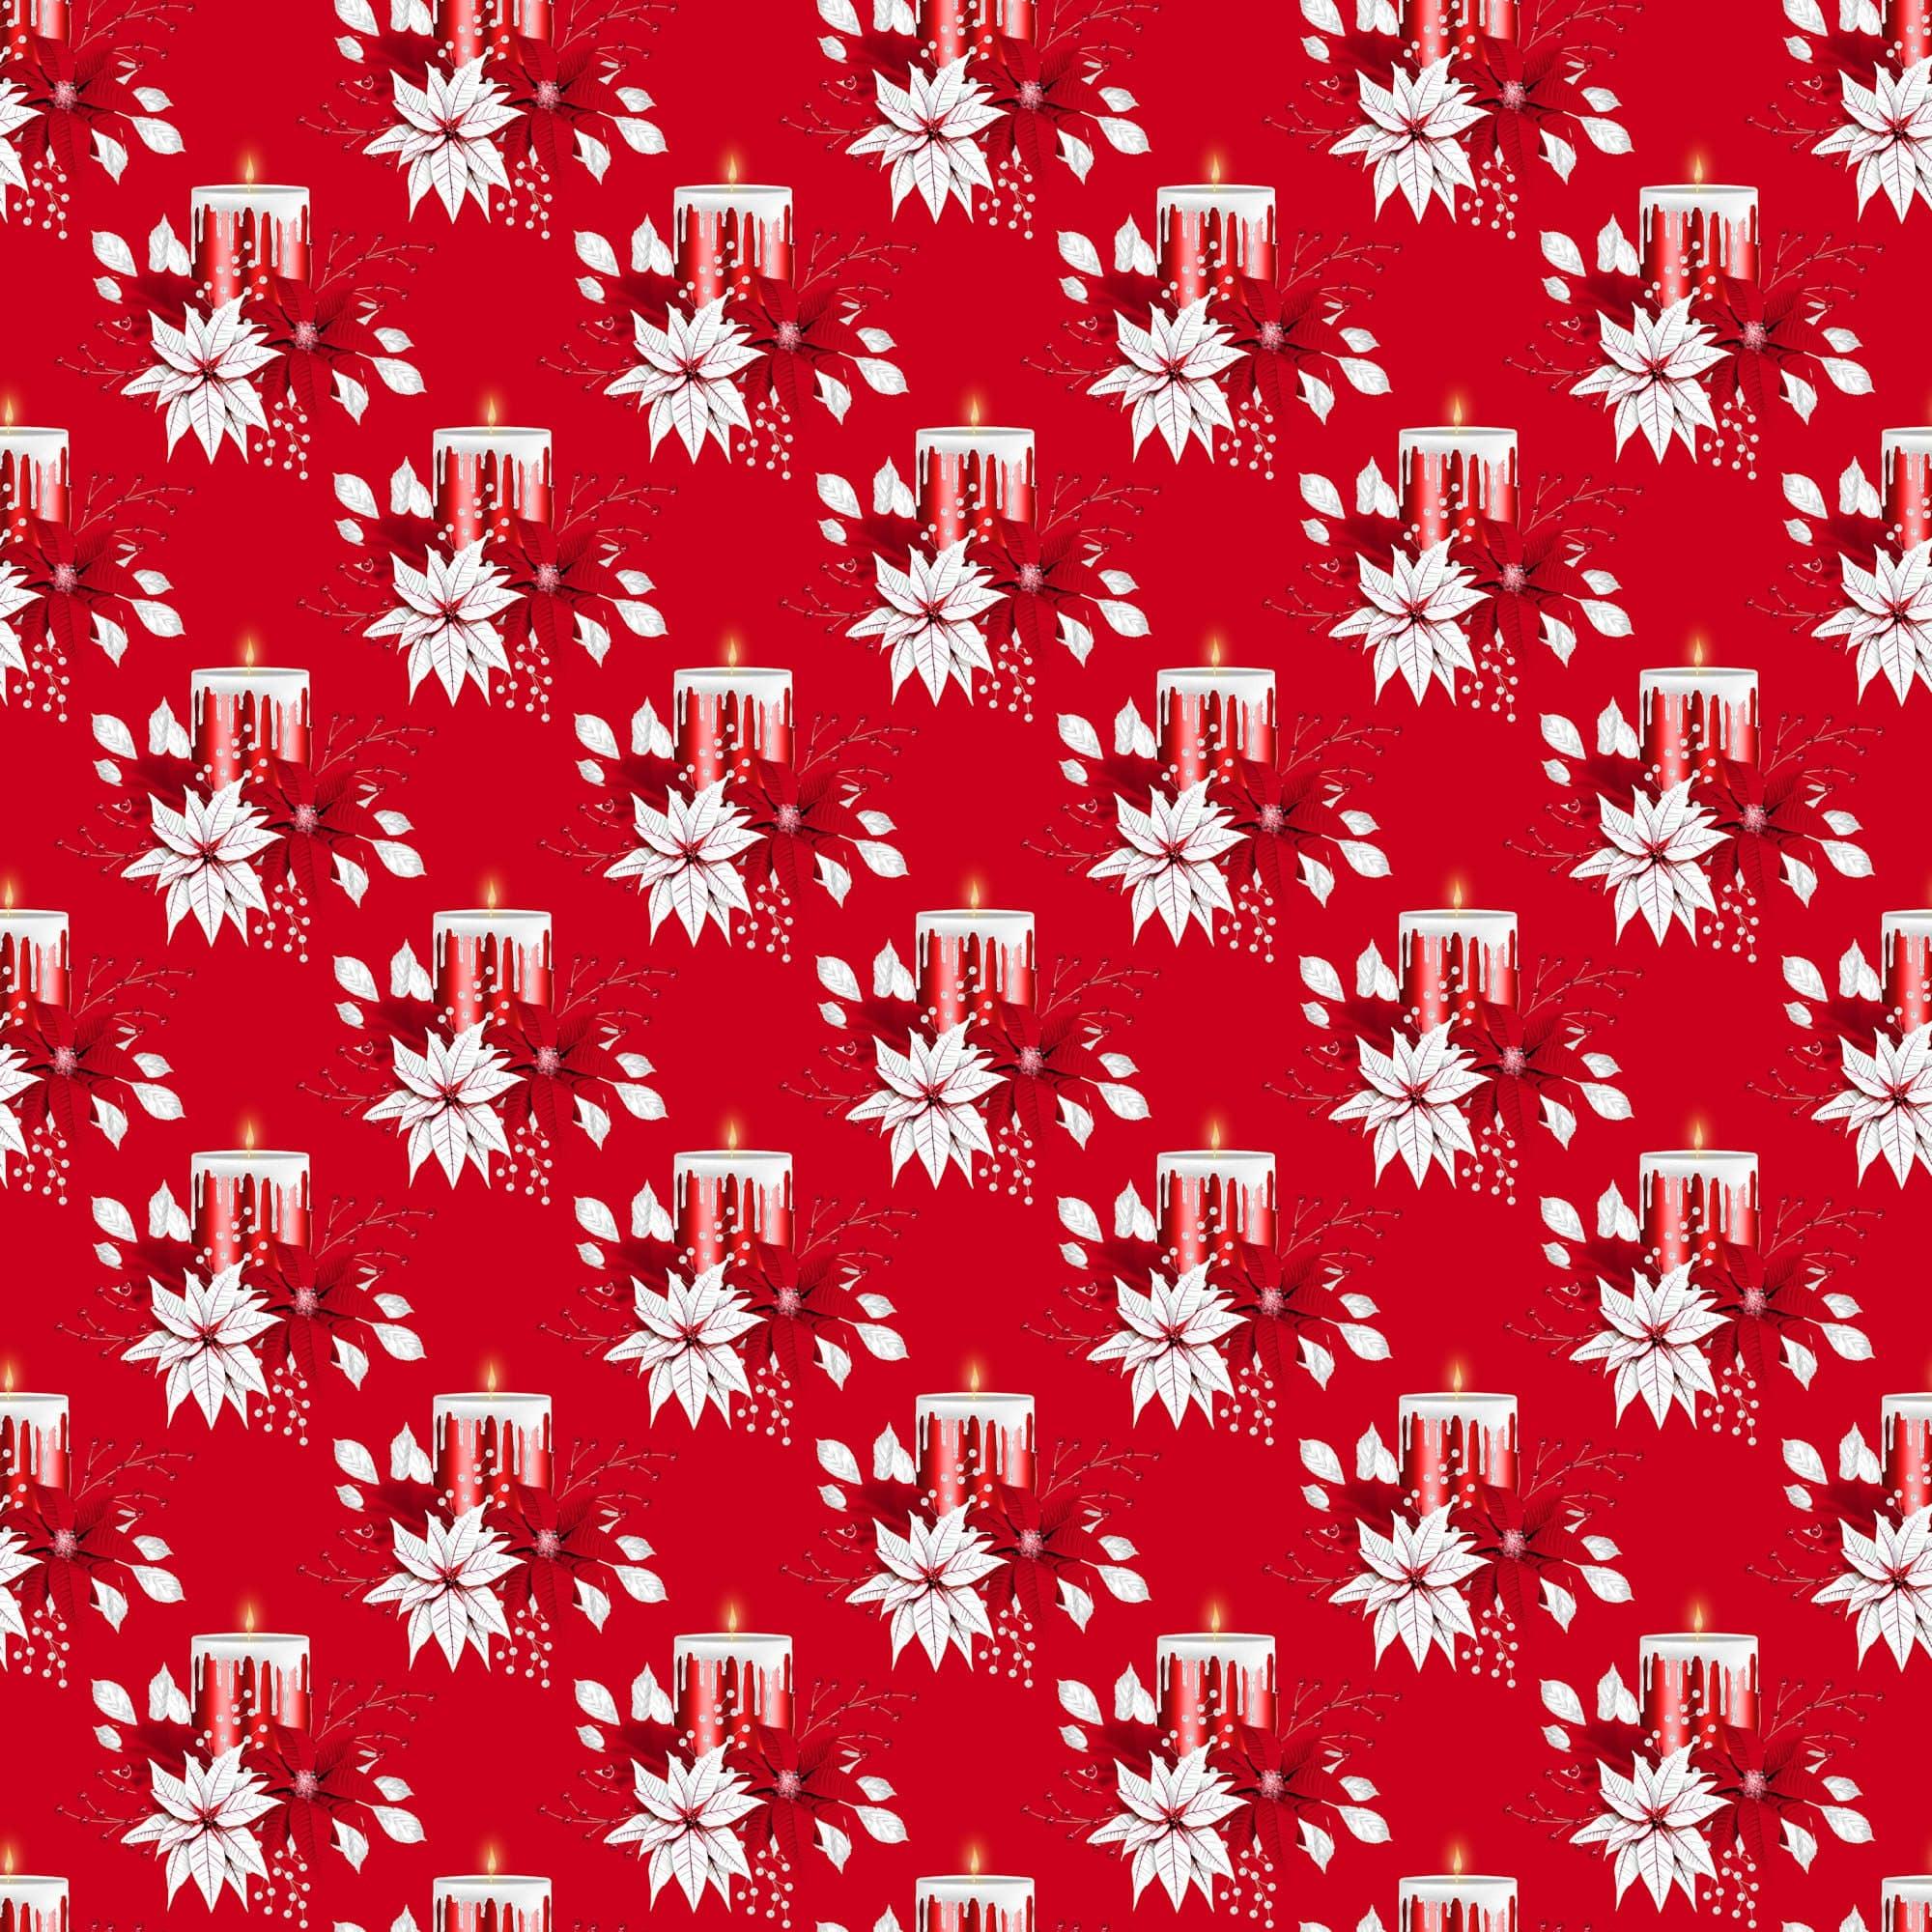 Peppermint Christmas Collection Flicker 12 x 12 Double-Sided Scrapbook Paper by SSC Designs - Scrapbook Supply Companies